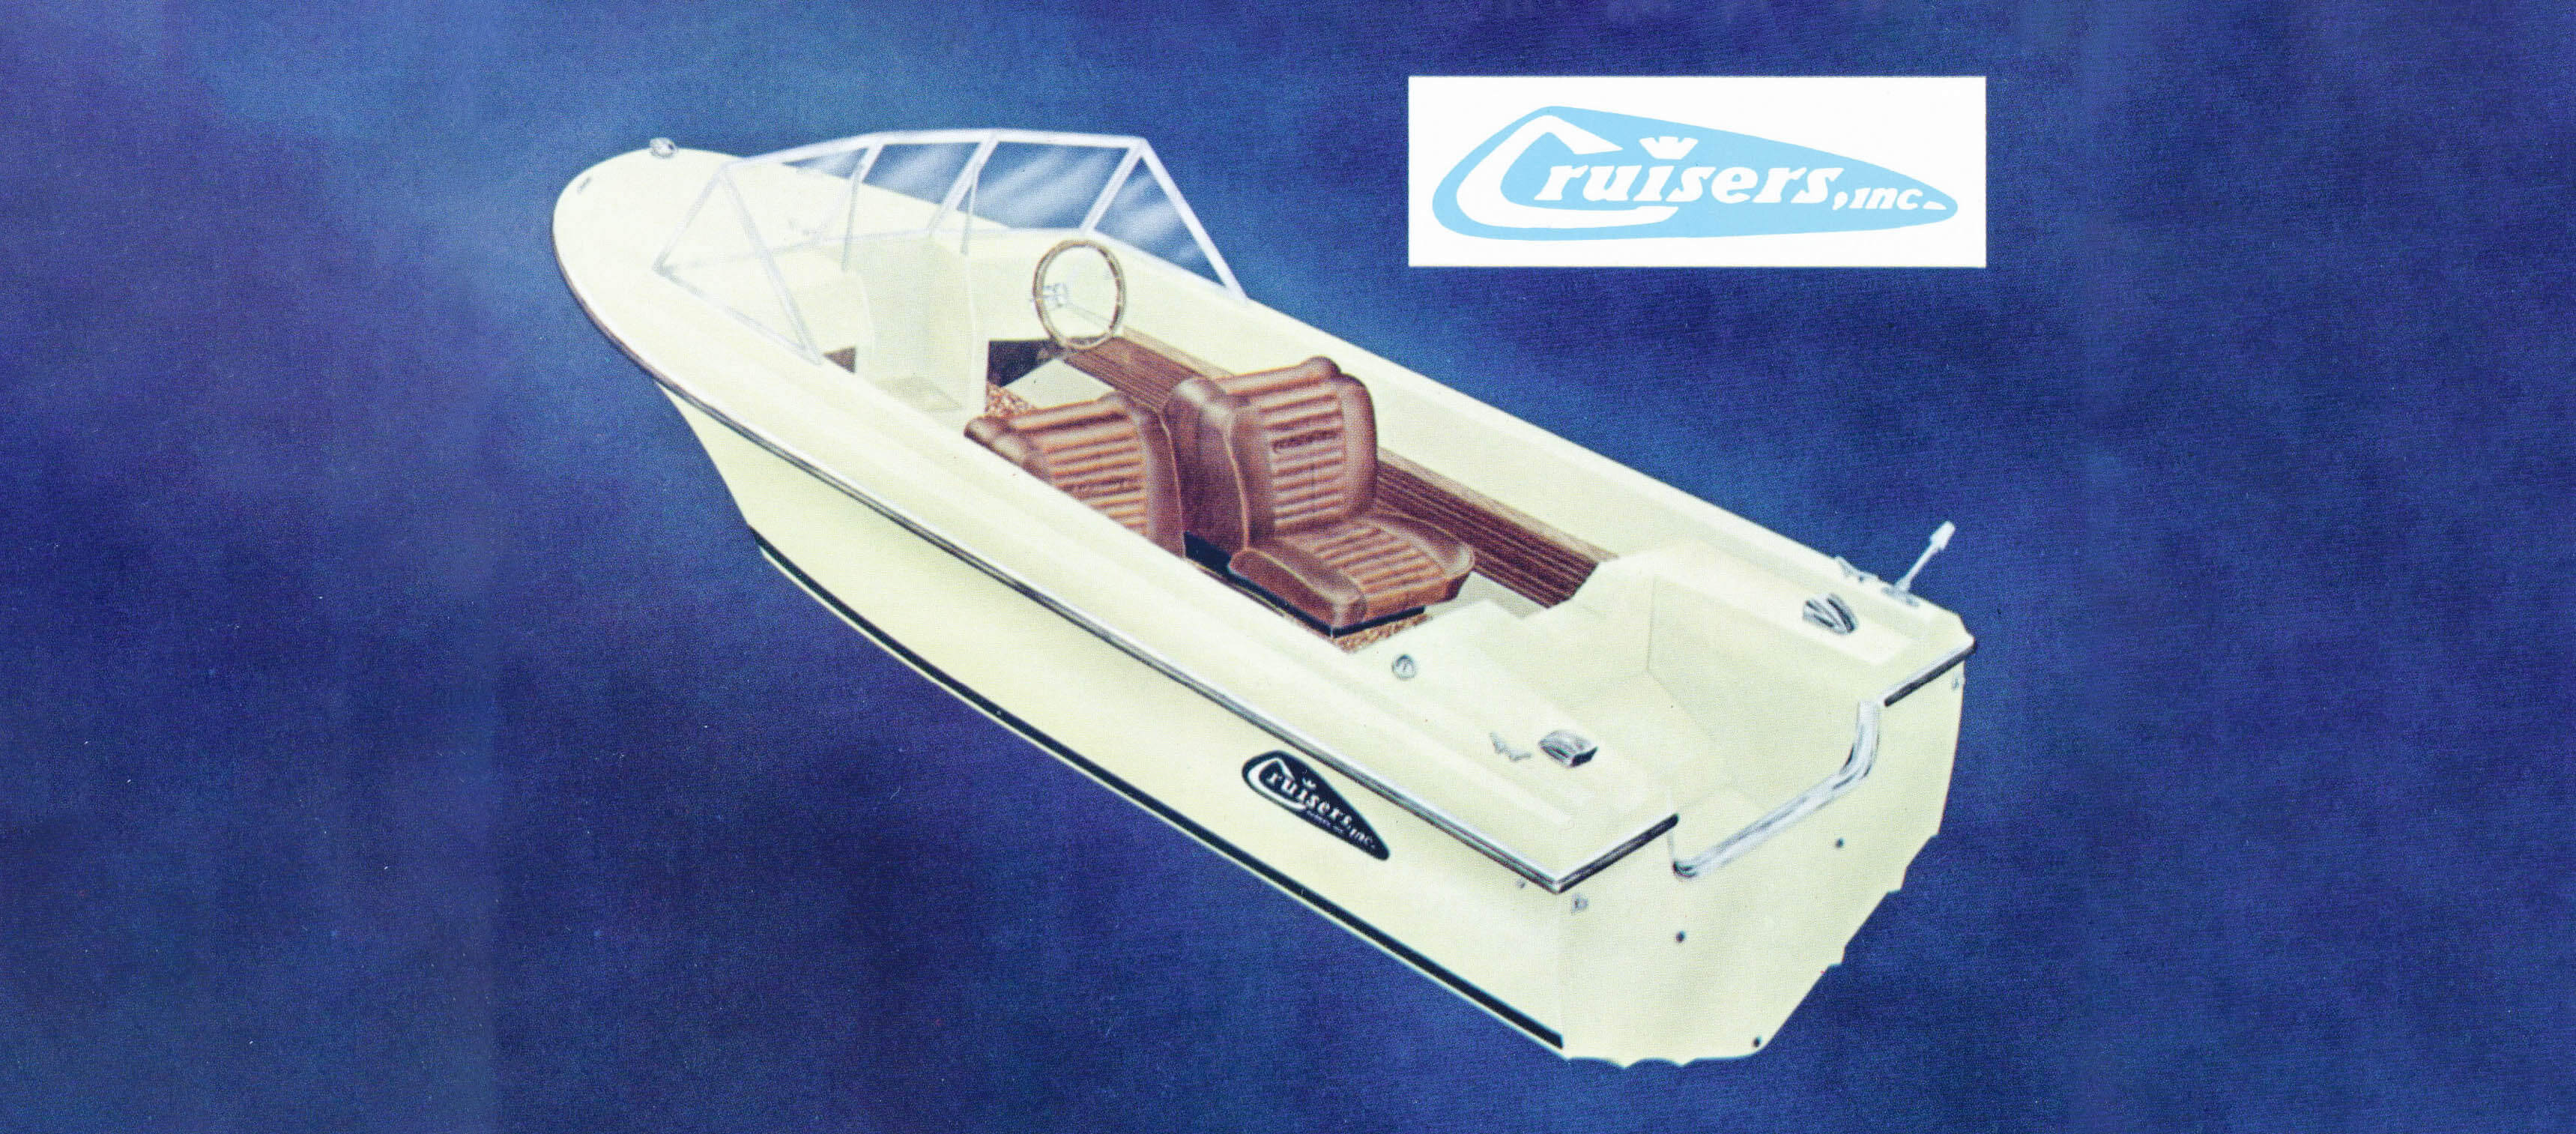 vintage cruisers boat and logo